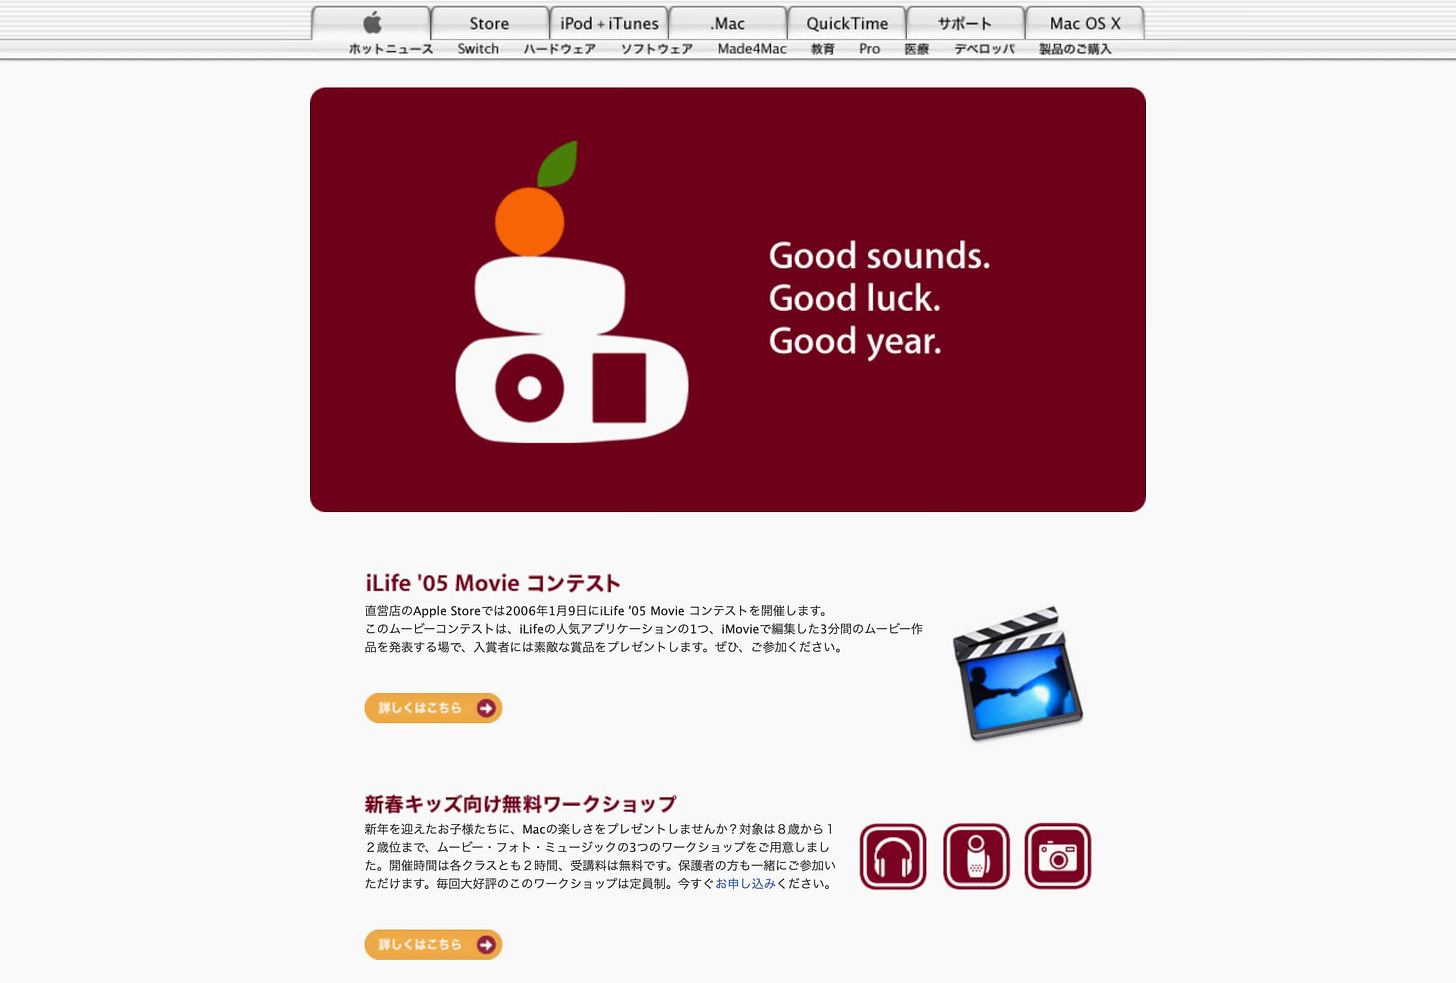 A screenshot of Apple's 2006 webpage showing displaying the Japan New Year's promotion.